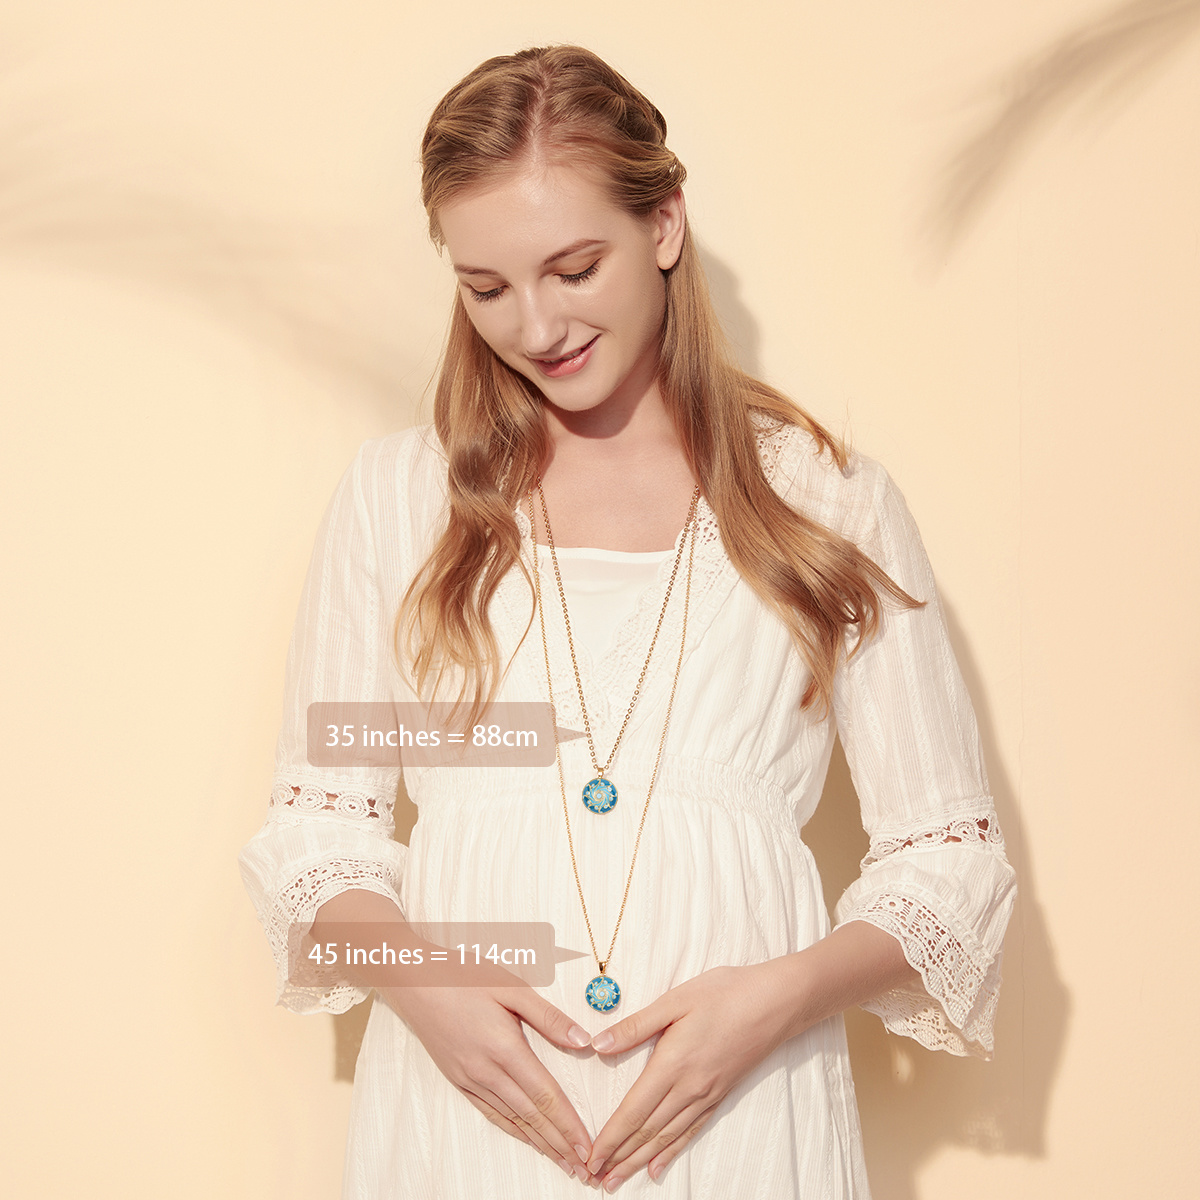 Merryshine Jewelry Prenatal Education Music Bell Angel Caller Harmony Ball Pregnancy Chime Necklaces